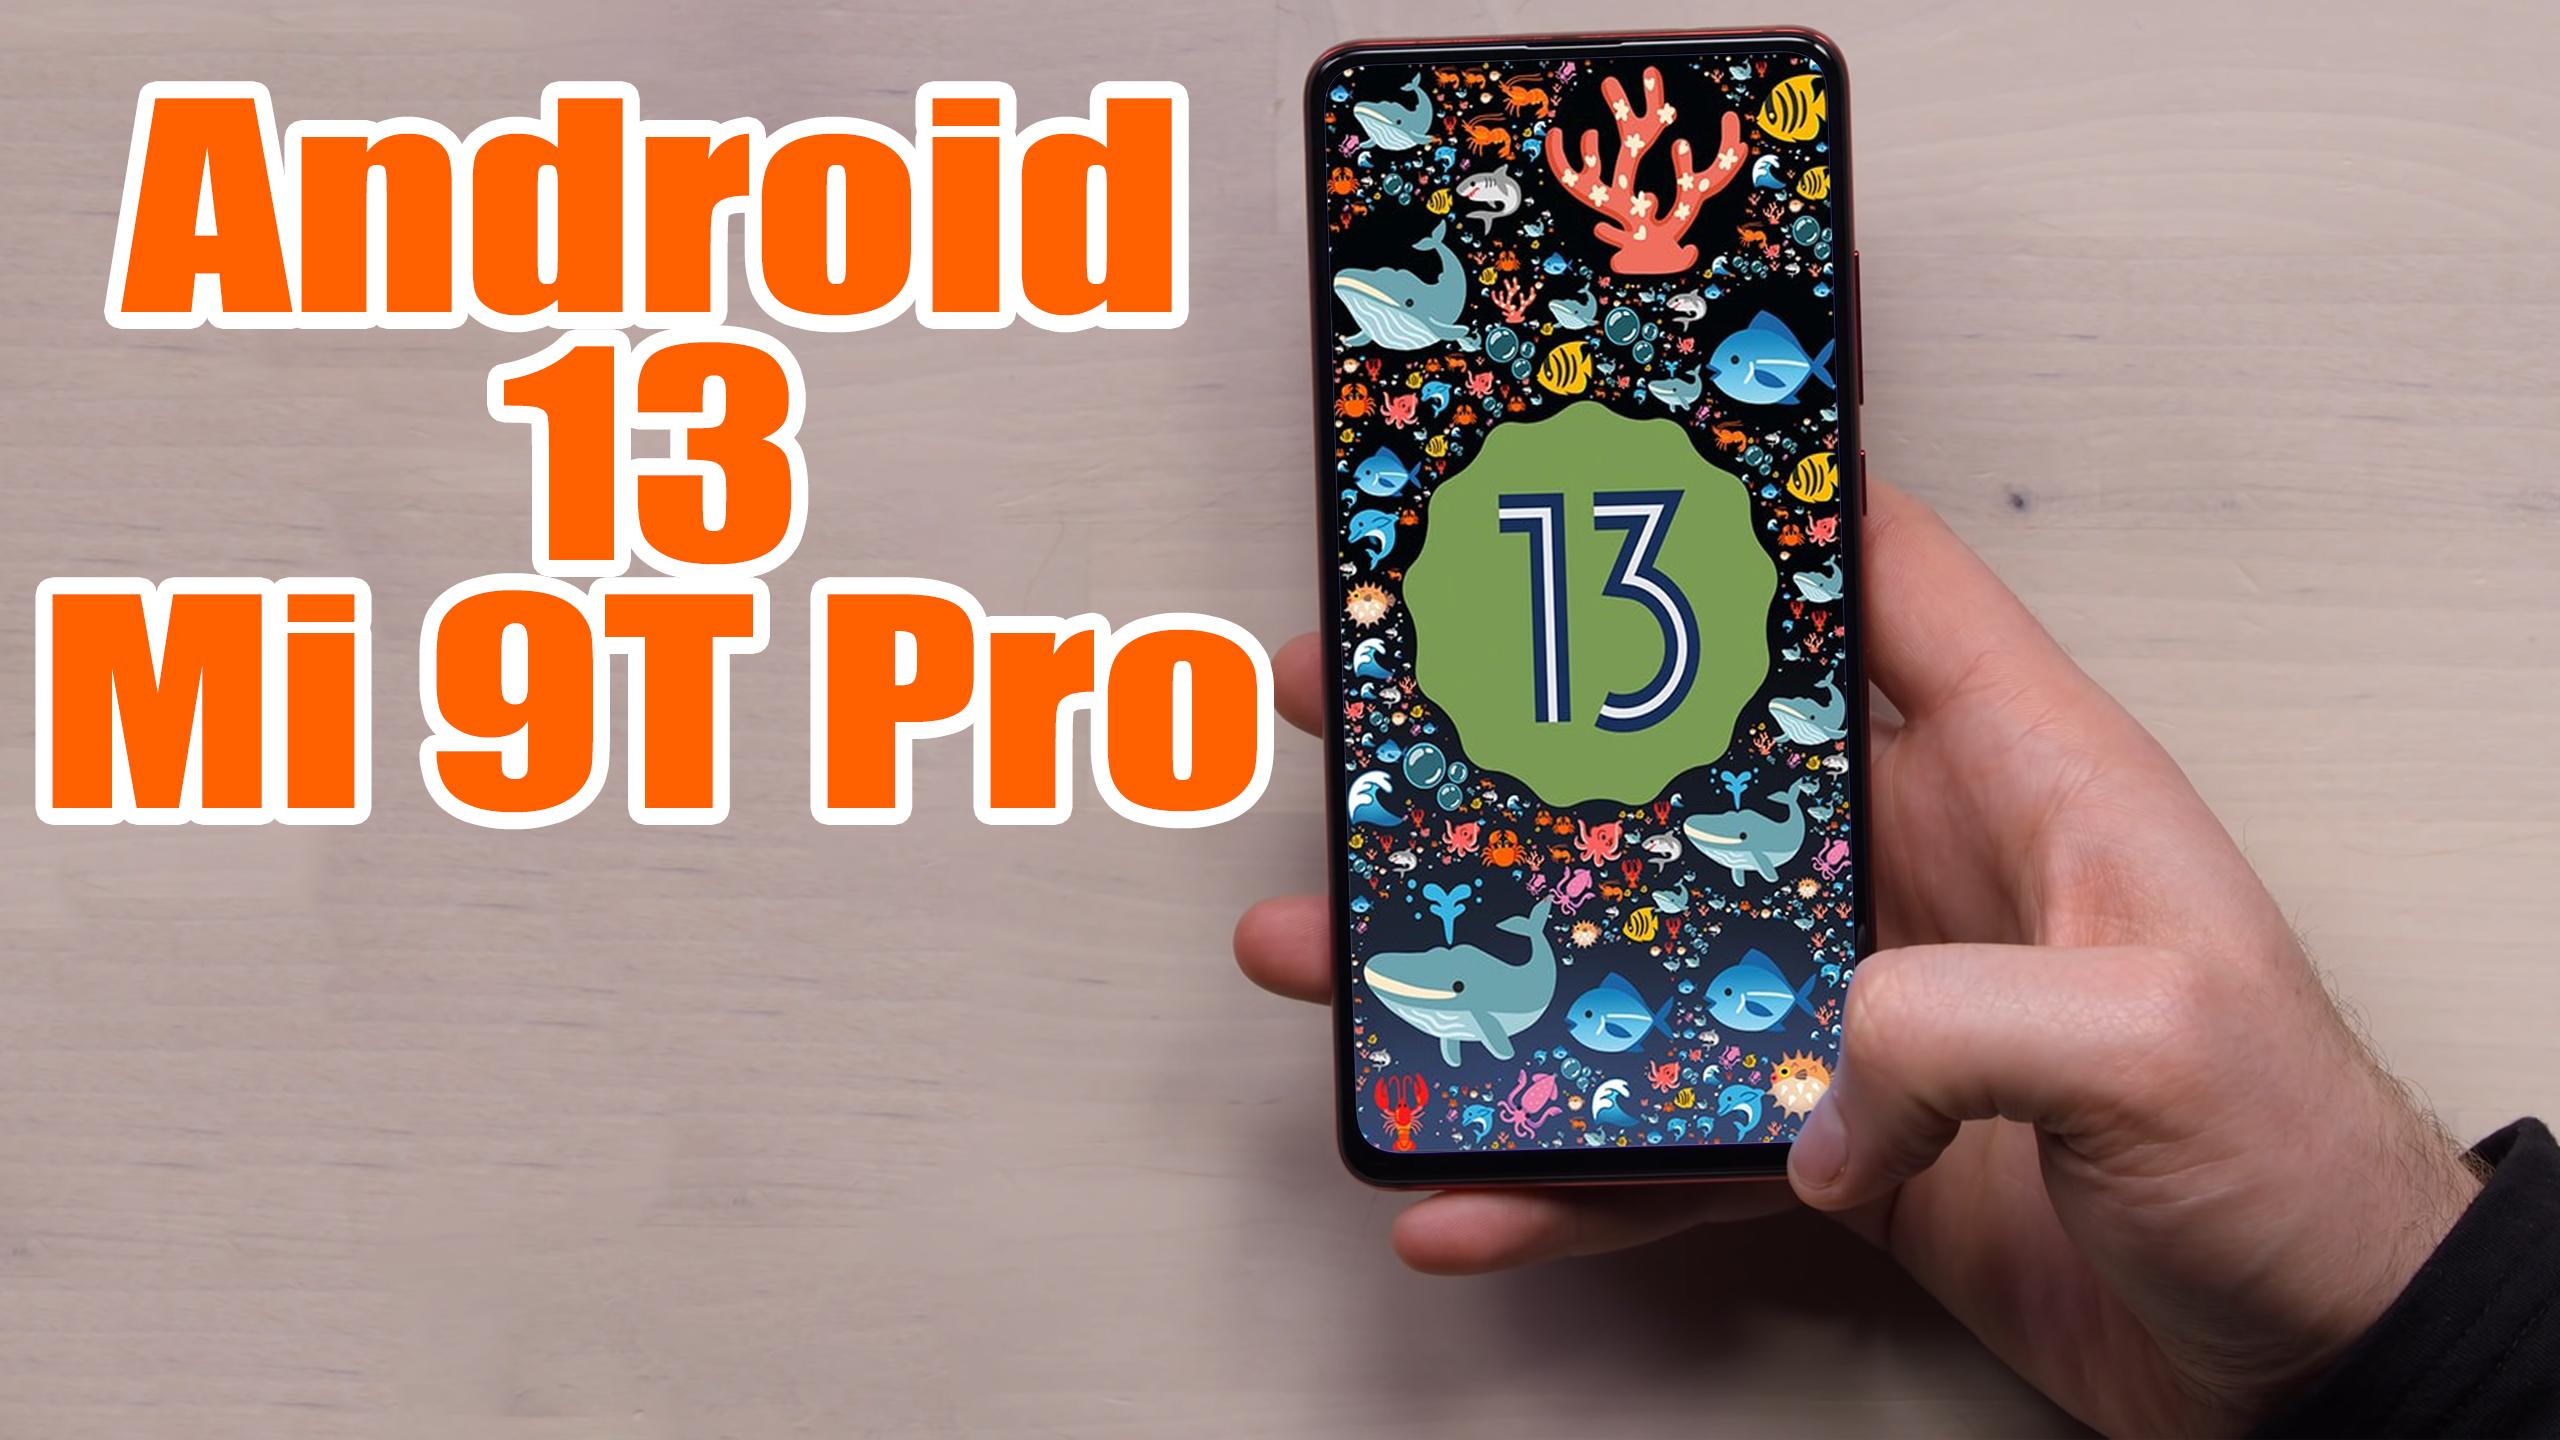 Install Android 13 On Redmi K20 Pro Mi 9t Pro Aosp Rom How To Guide The Upgrade Guide 7639